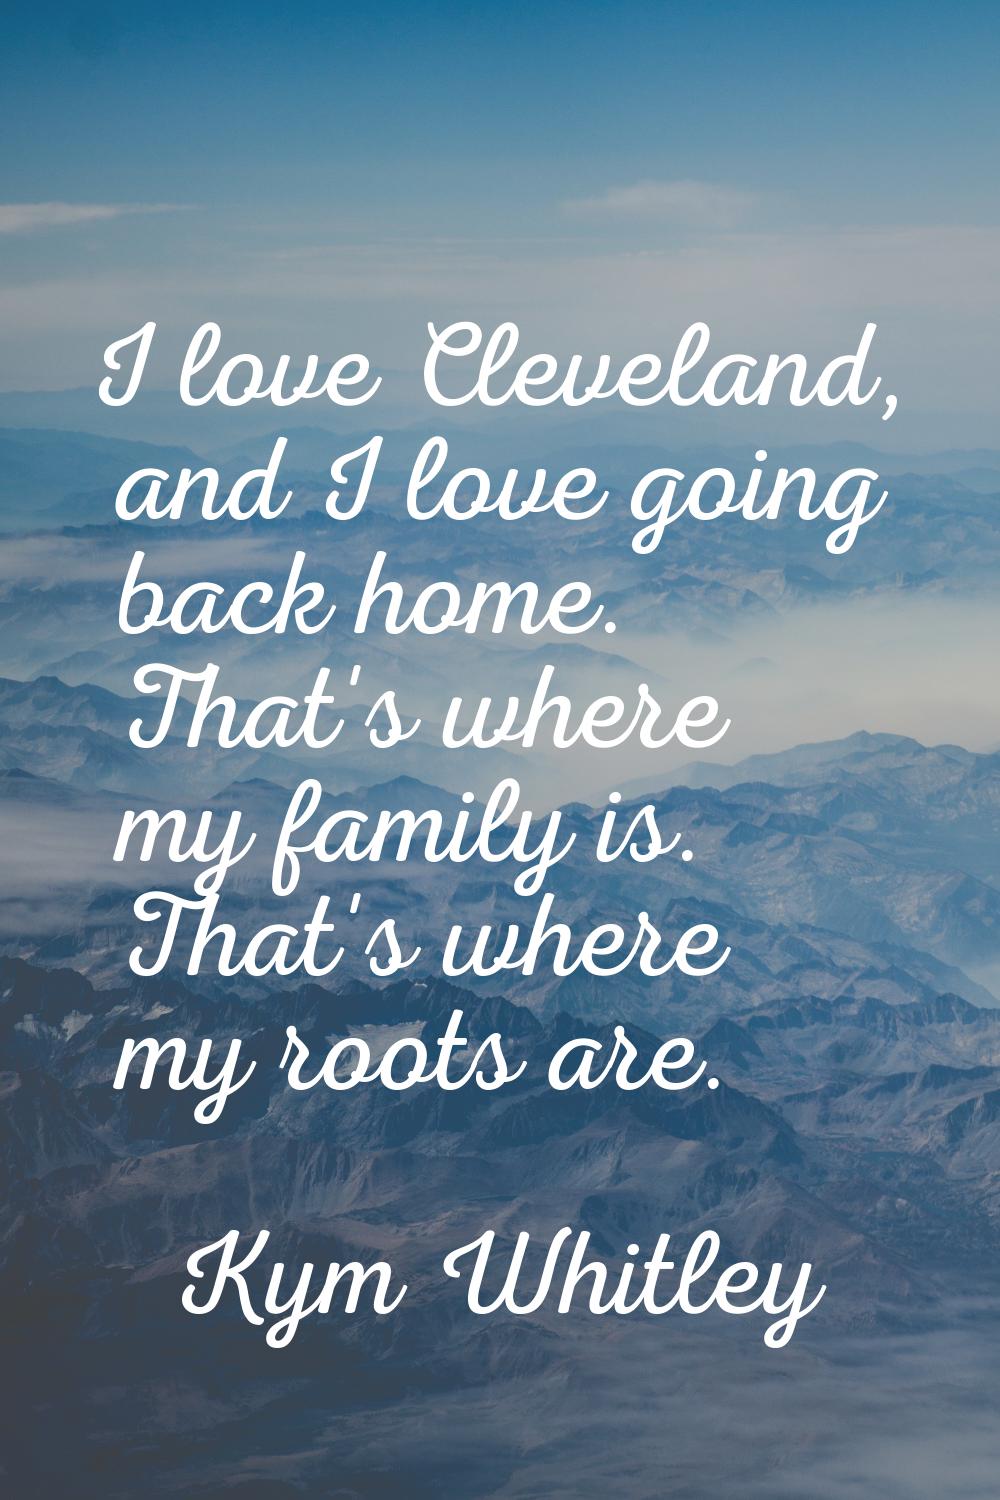 I love Cleveland, and I love going back home. That's where my family is. That's where my roots are.